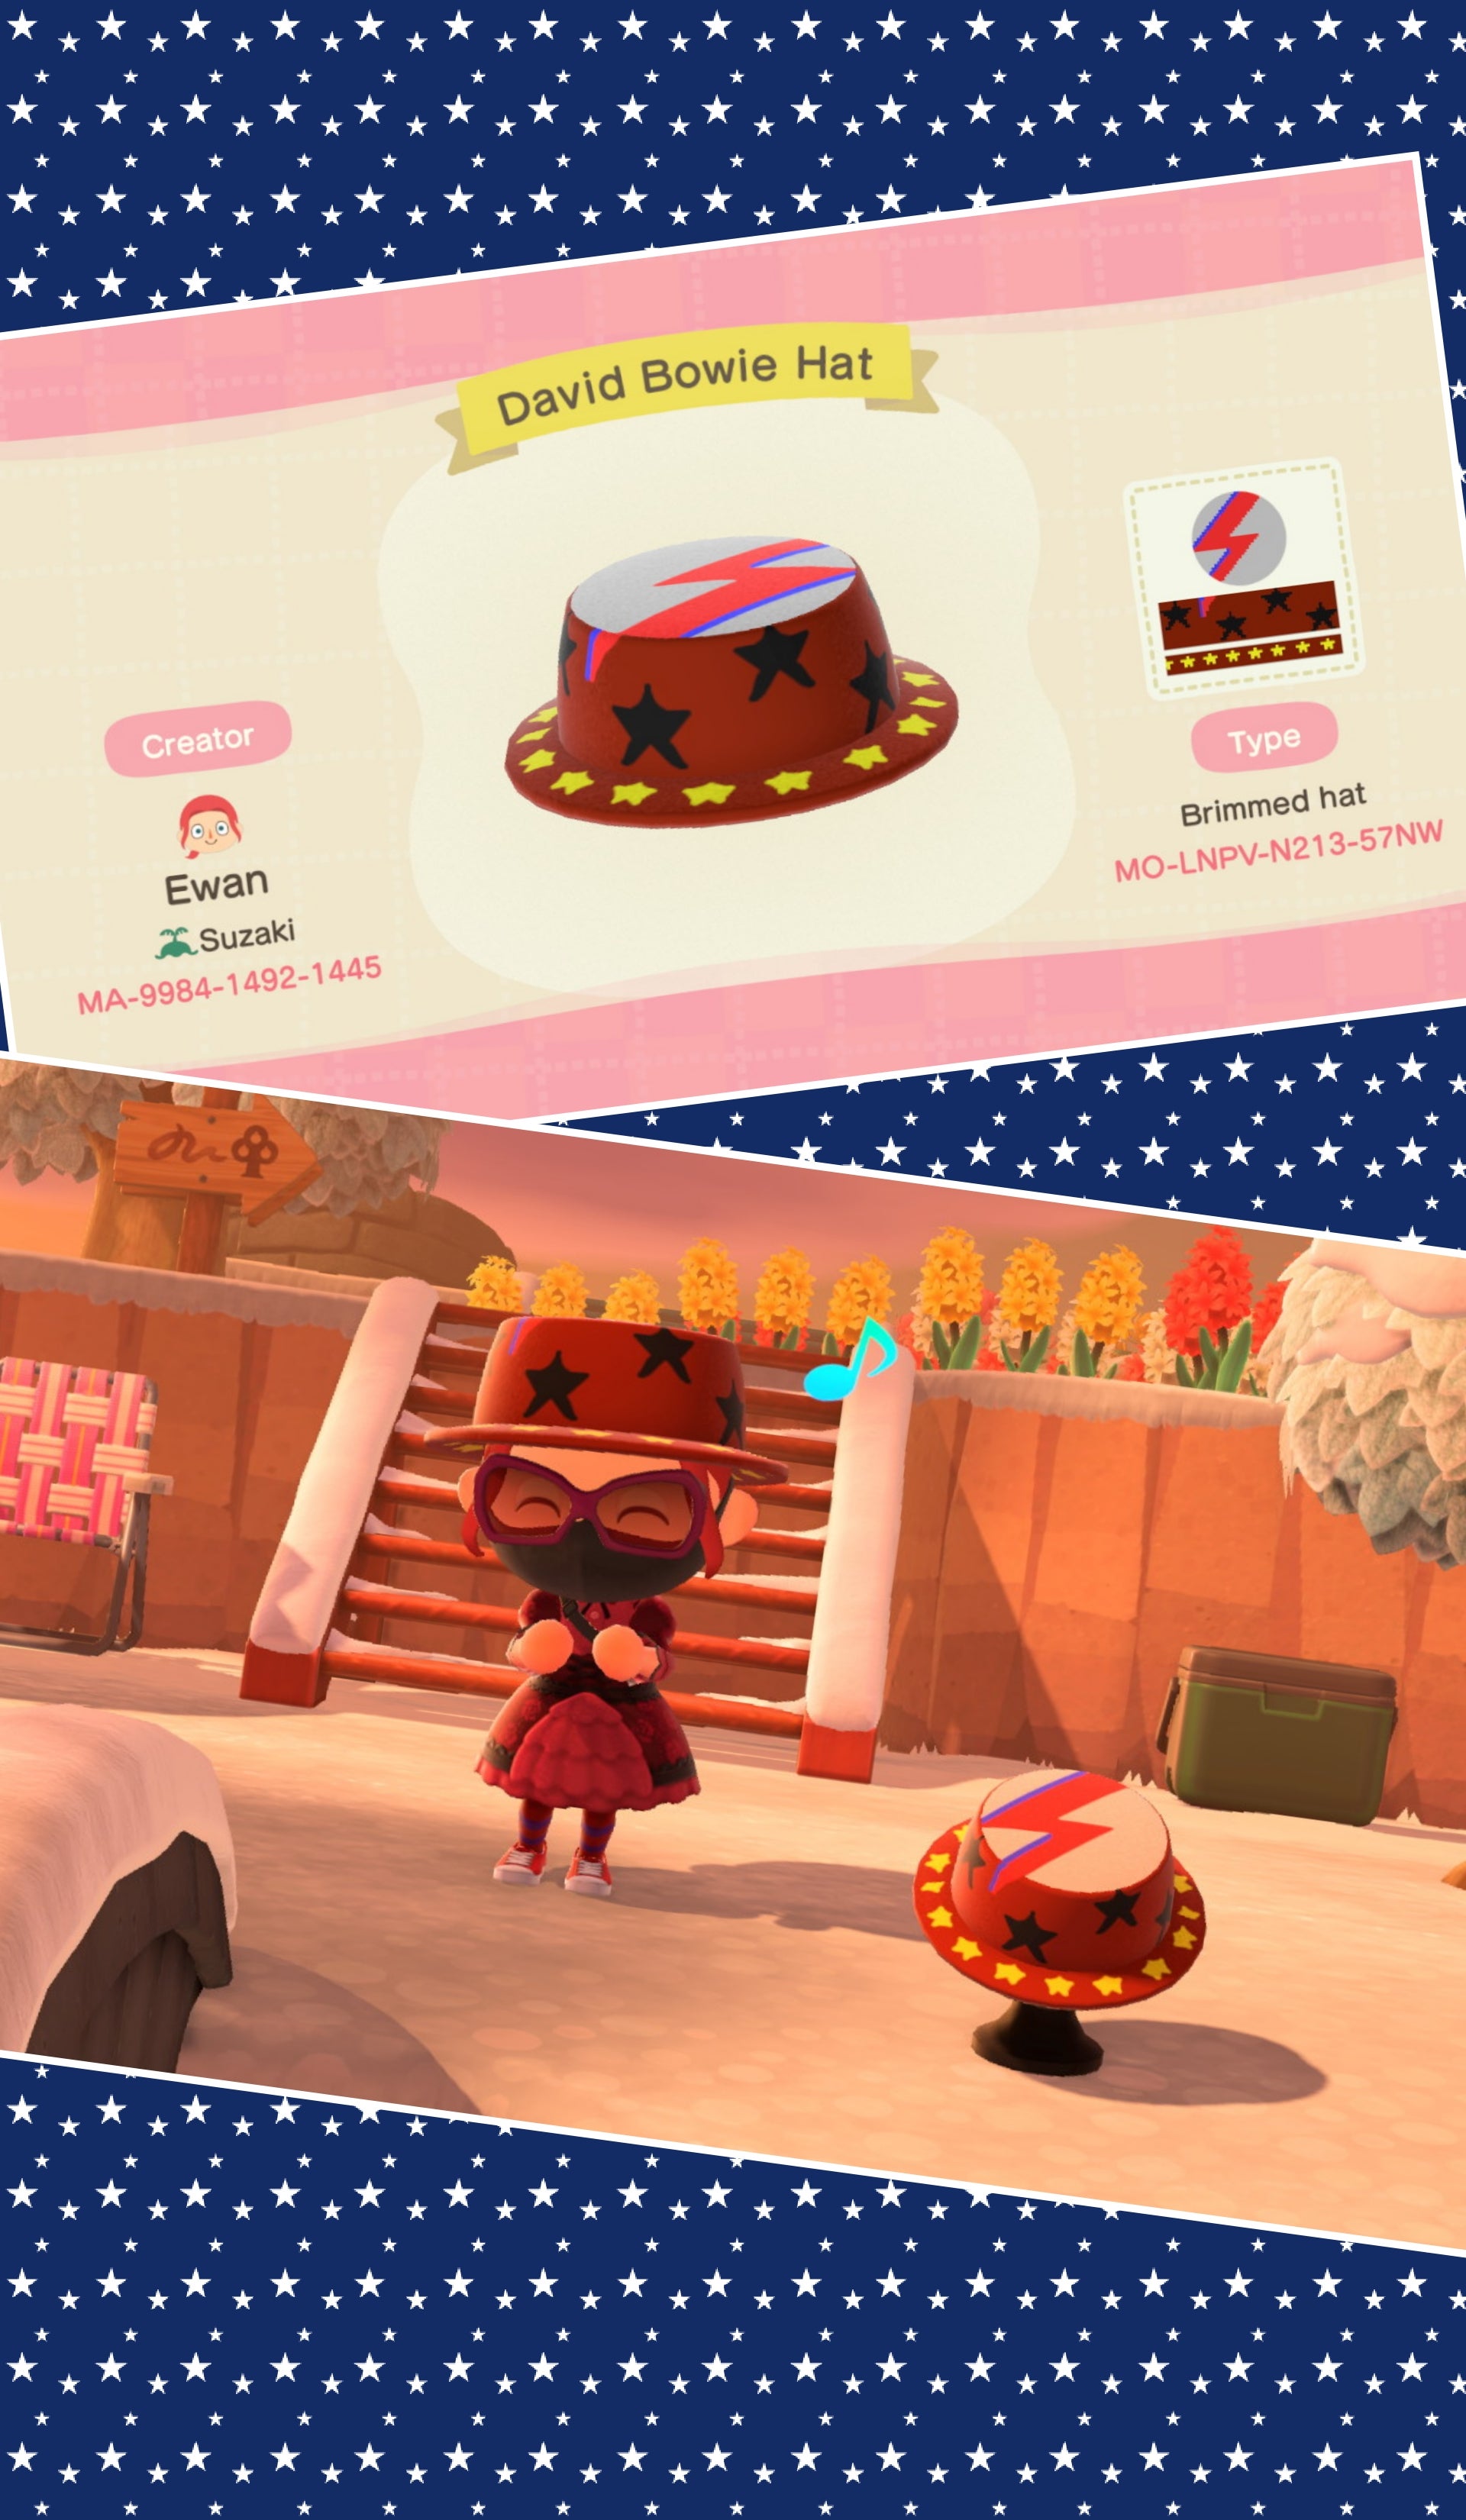 Animal Crossing A David Bowie themed hat in honour of